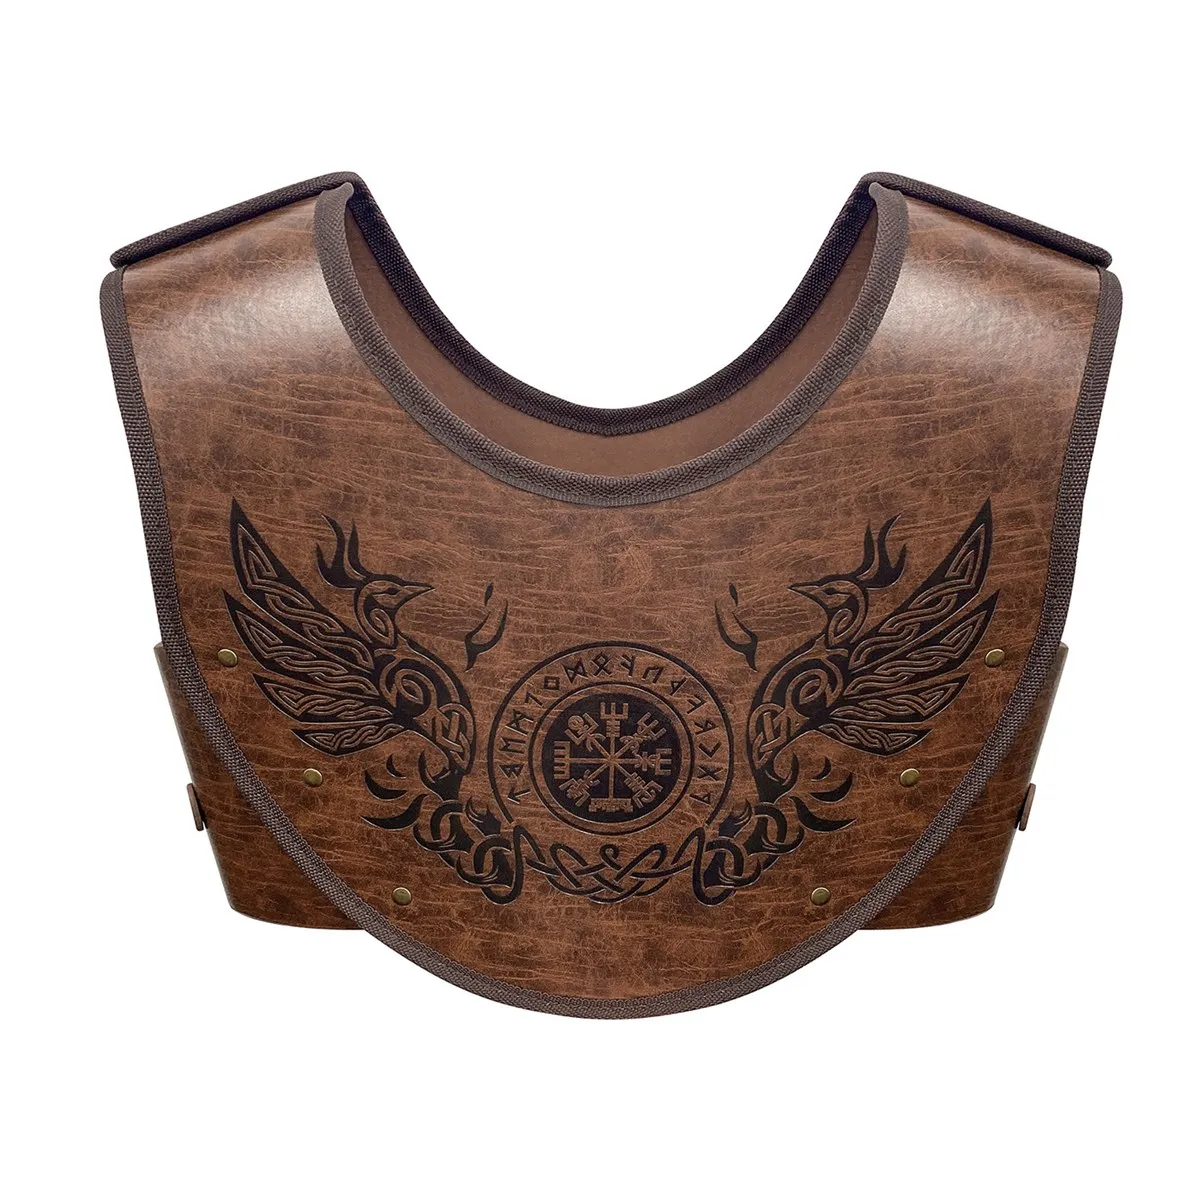 

Phoenix Vegvisir Embossed Faux Leather Chest Armor, Warrior Vest Armor, Medieval Armor for LARP Cosplay